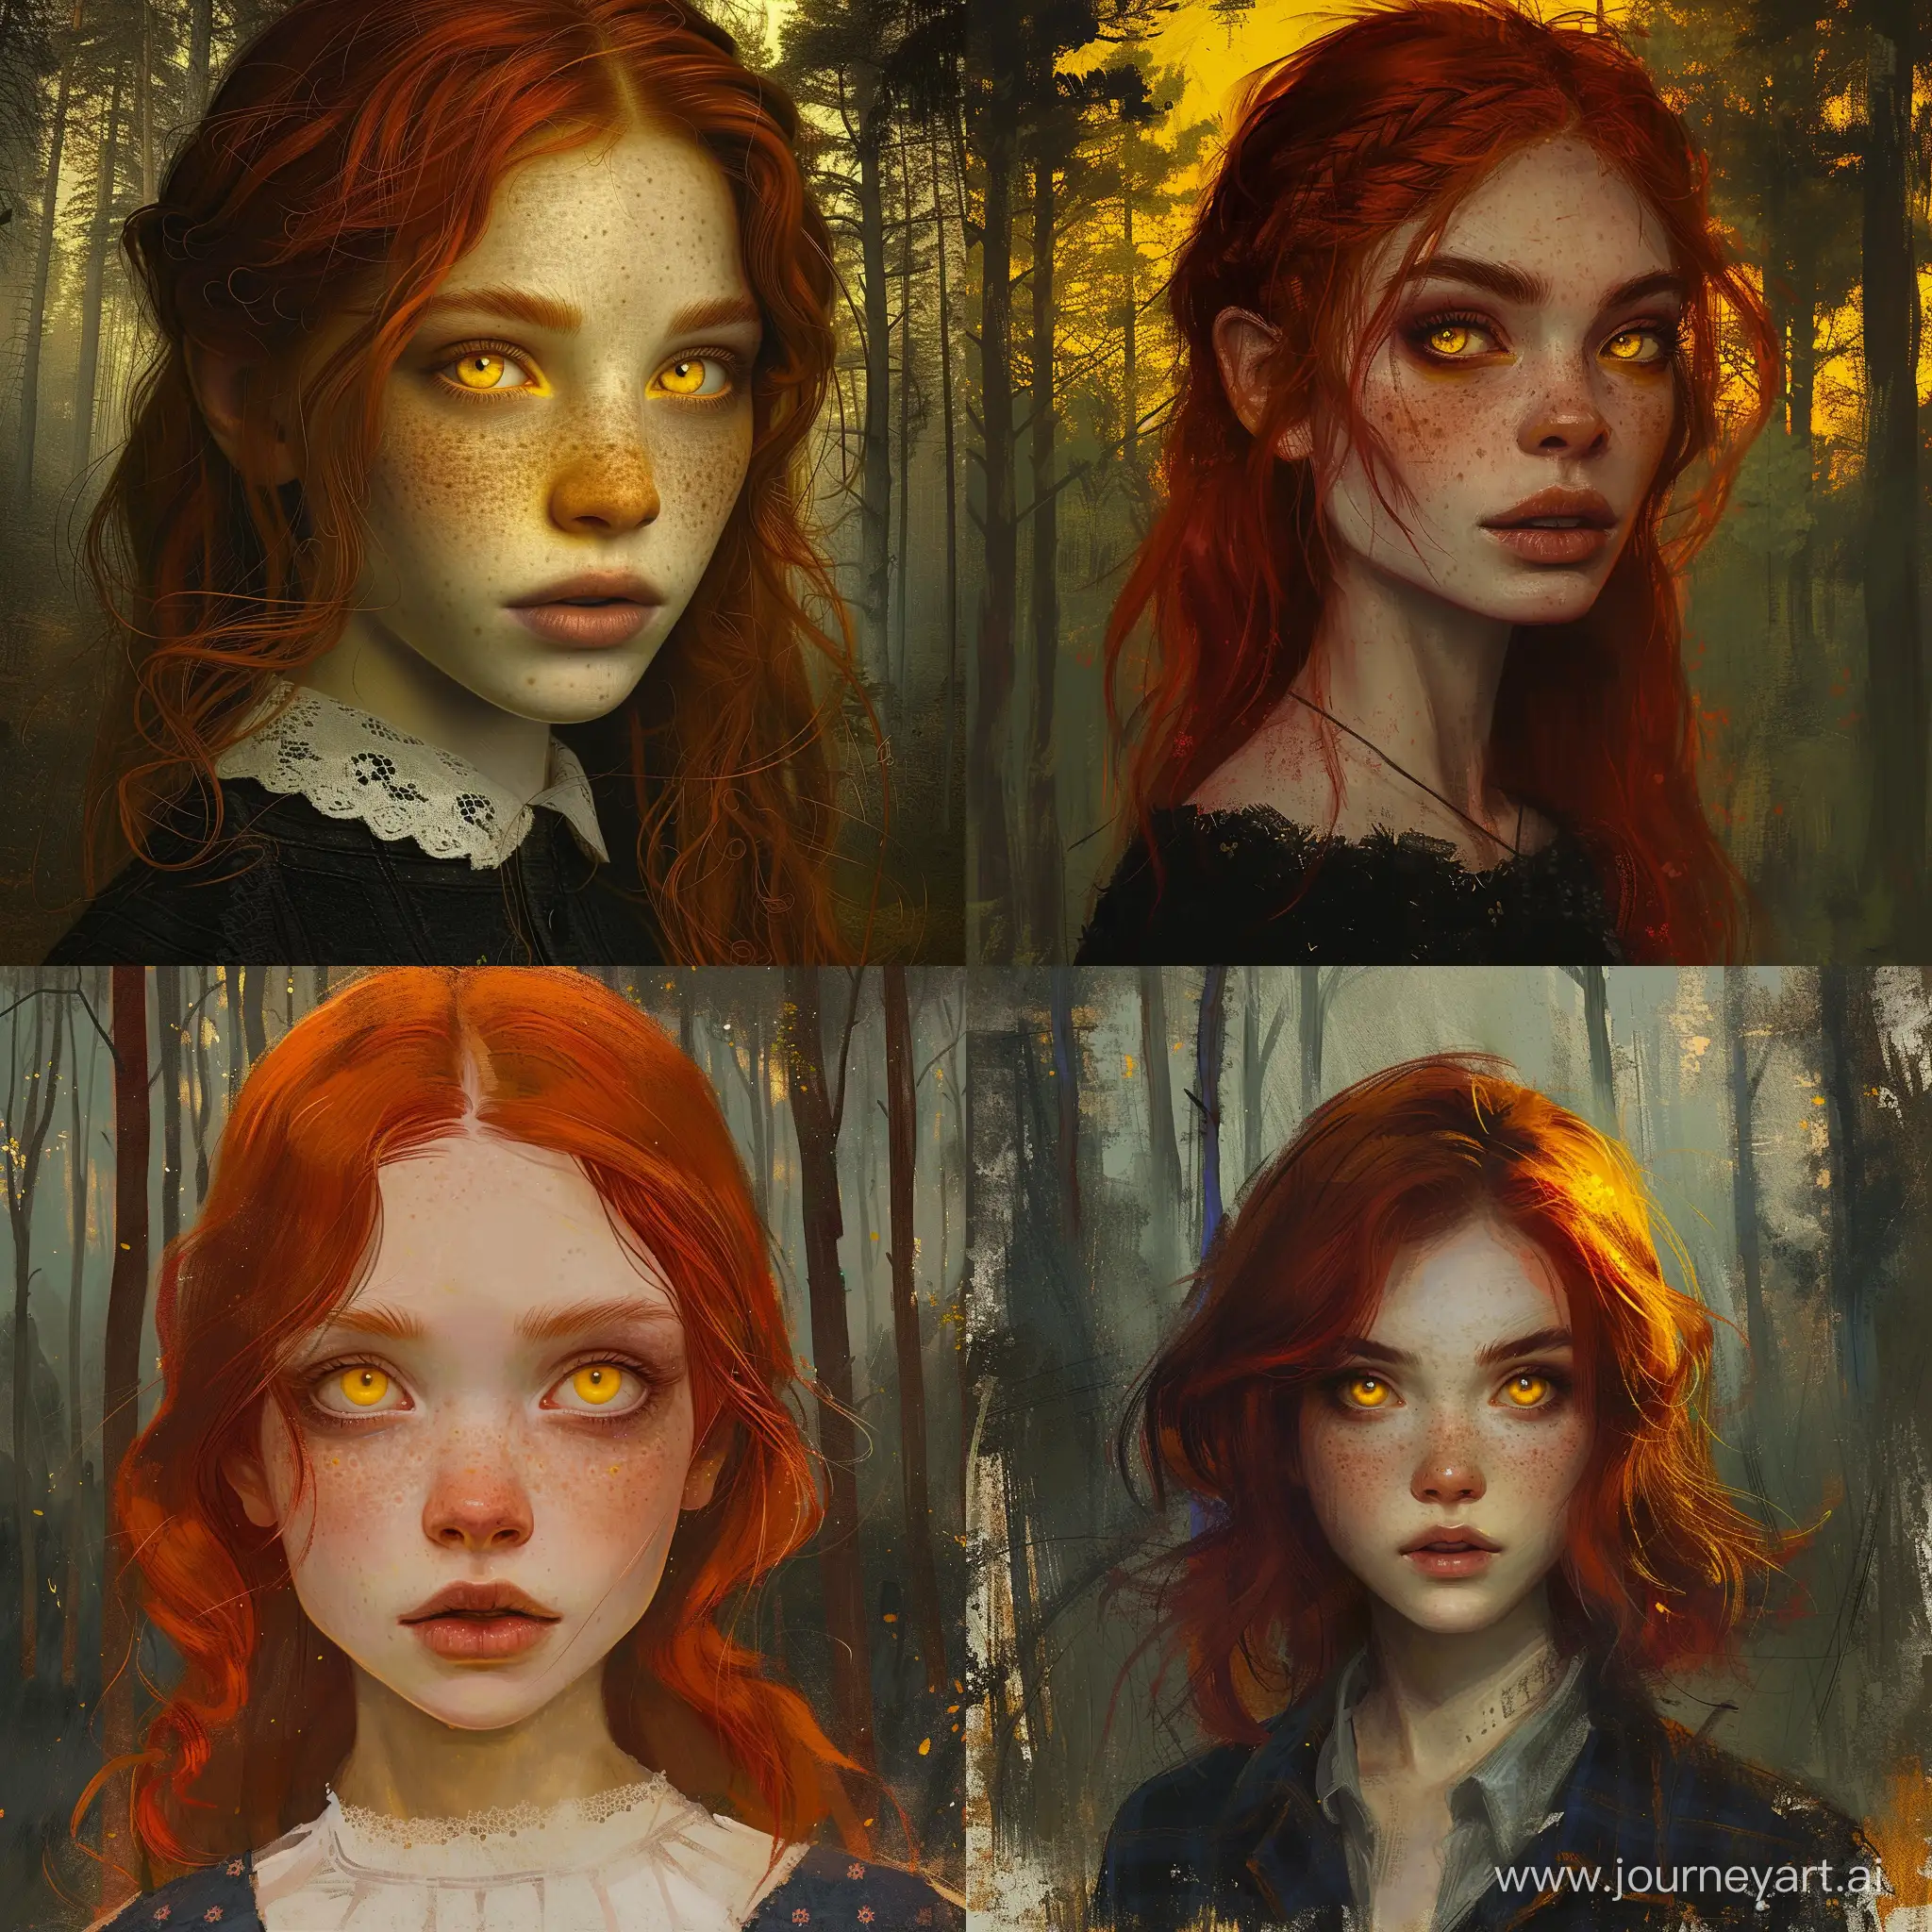 Enchanting-RedHaired-Maiden-in-a-Forest-Oasis-Classicism-Digital-Art